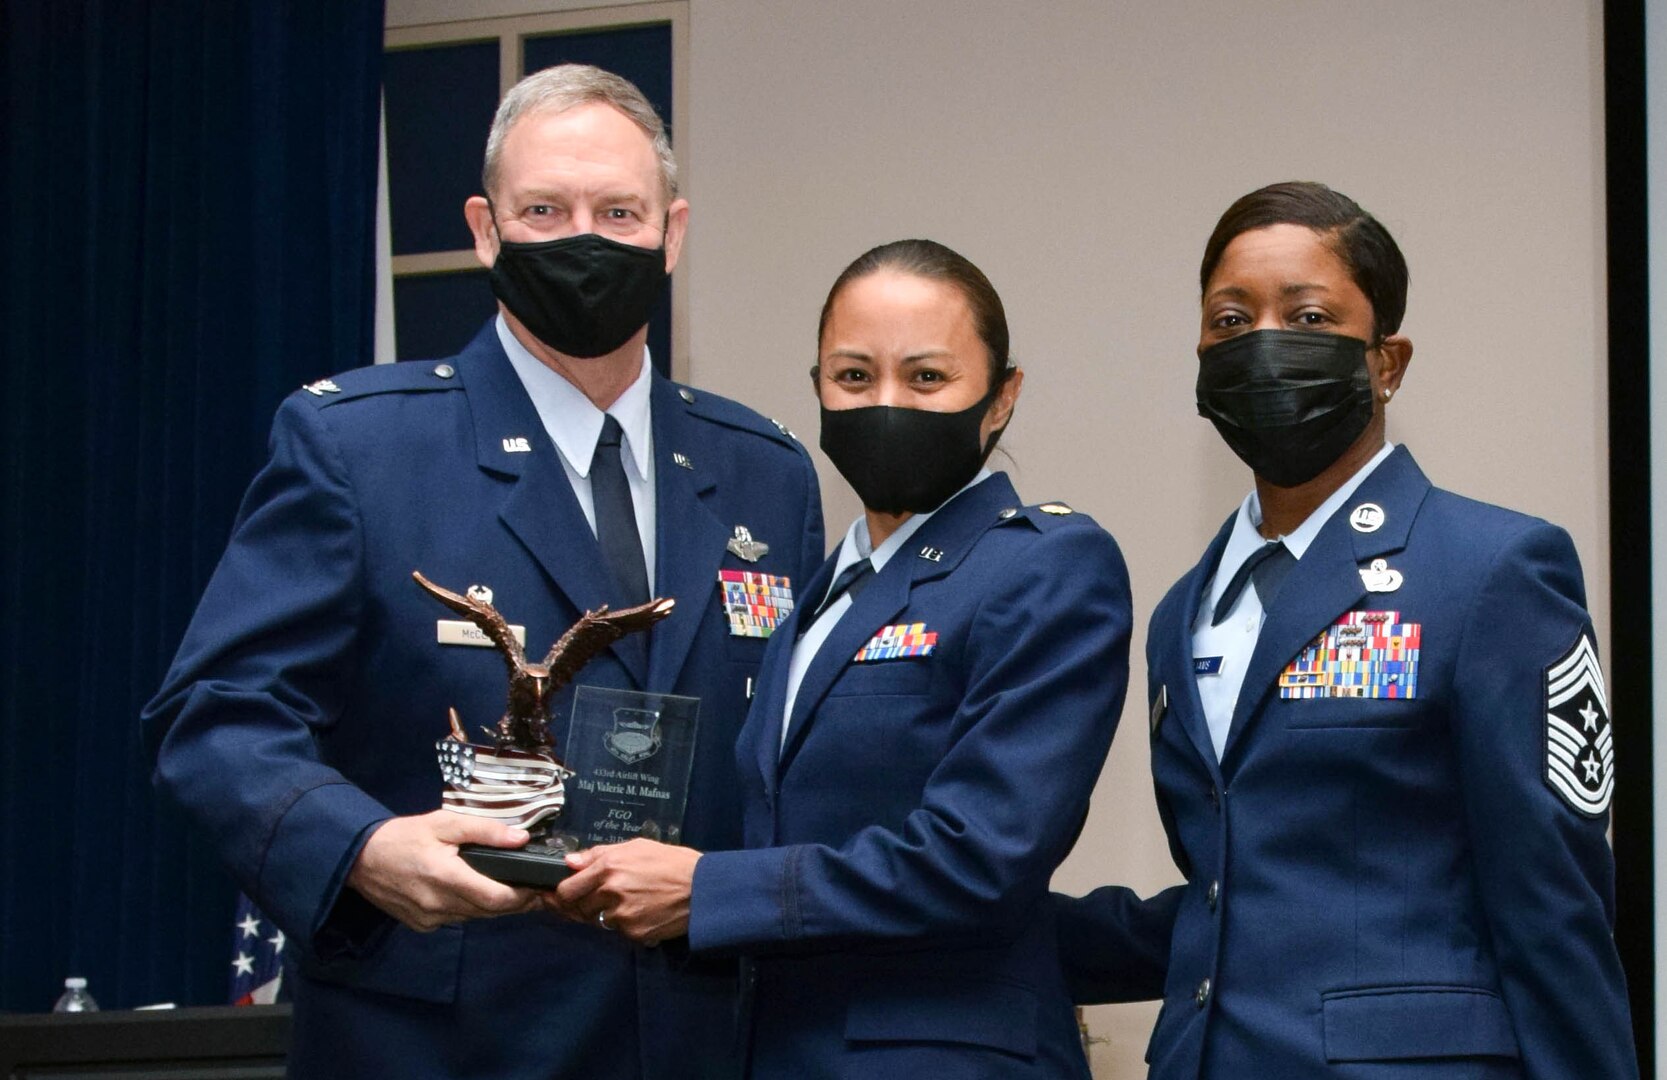 Col. Terry McClain, 433rd Airlift Wing commander, and Chief Master Sgt. Takesha Williams, 433rd AW command chief, present the Field Grade Officer of the Year award to Maj. Valerie Mafnas, 26th Aerial Port Squadron, at the wing’s annual awards ceremony Feb. 5, 2022, at Joint Base San Antonio-Lackland, Texas. (U.S. Air Force photo by Staff Sgt. Monet Villacorte)